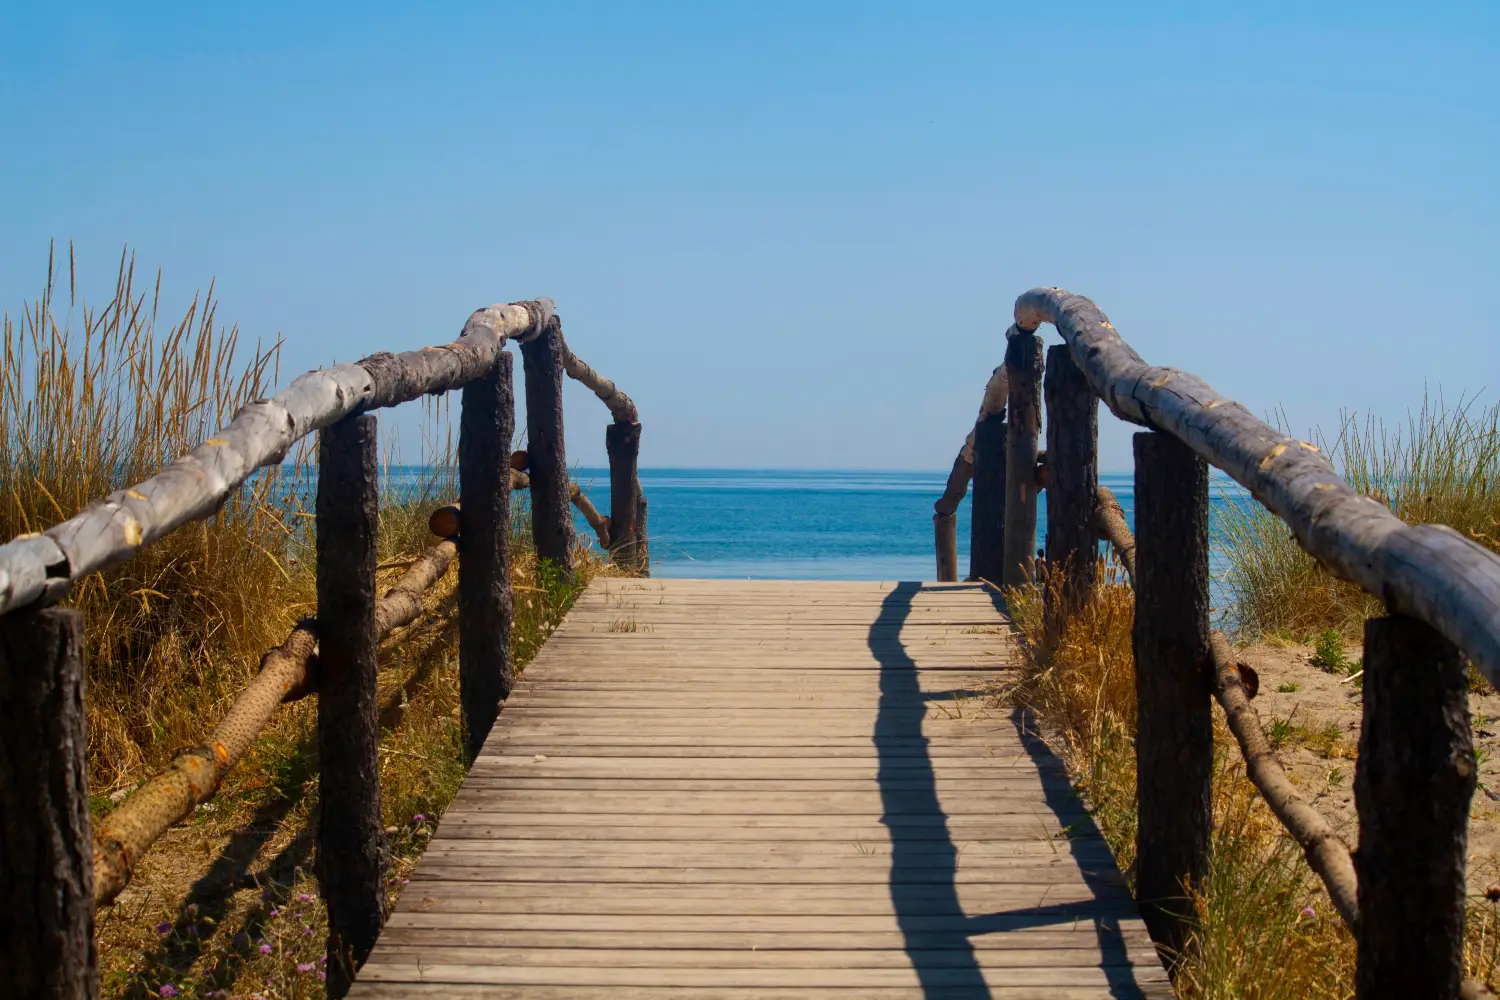 Ferry to Ravenna - A wooden bridge leading to a beach with blue waters during summer in Ravenna, Italy.